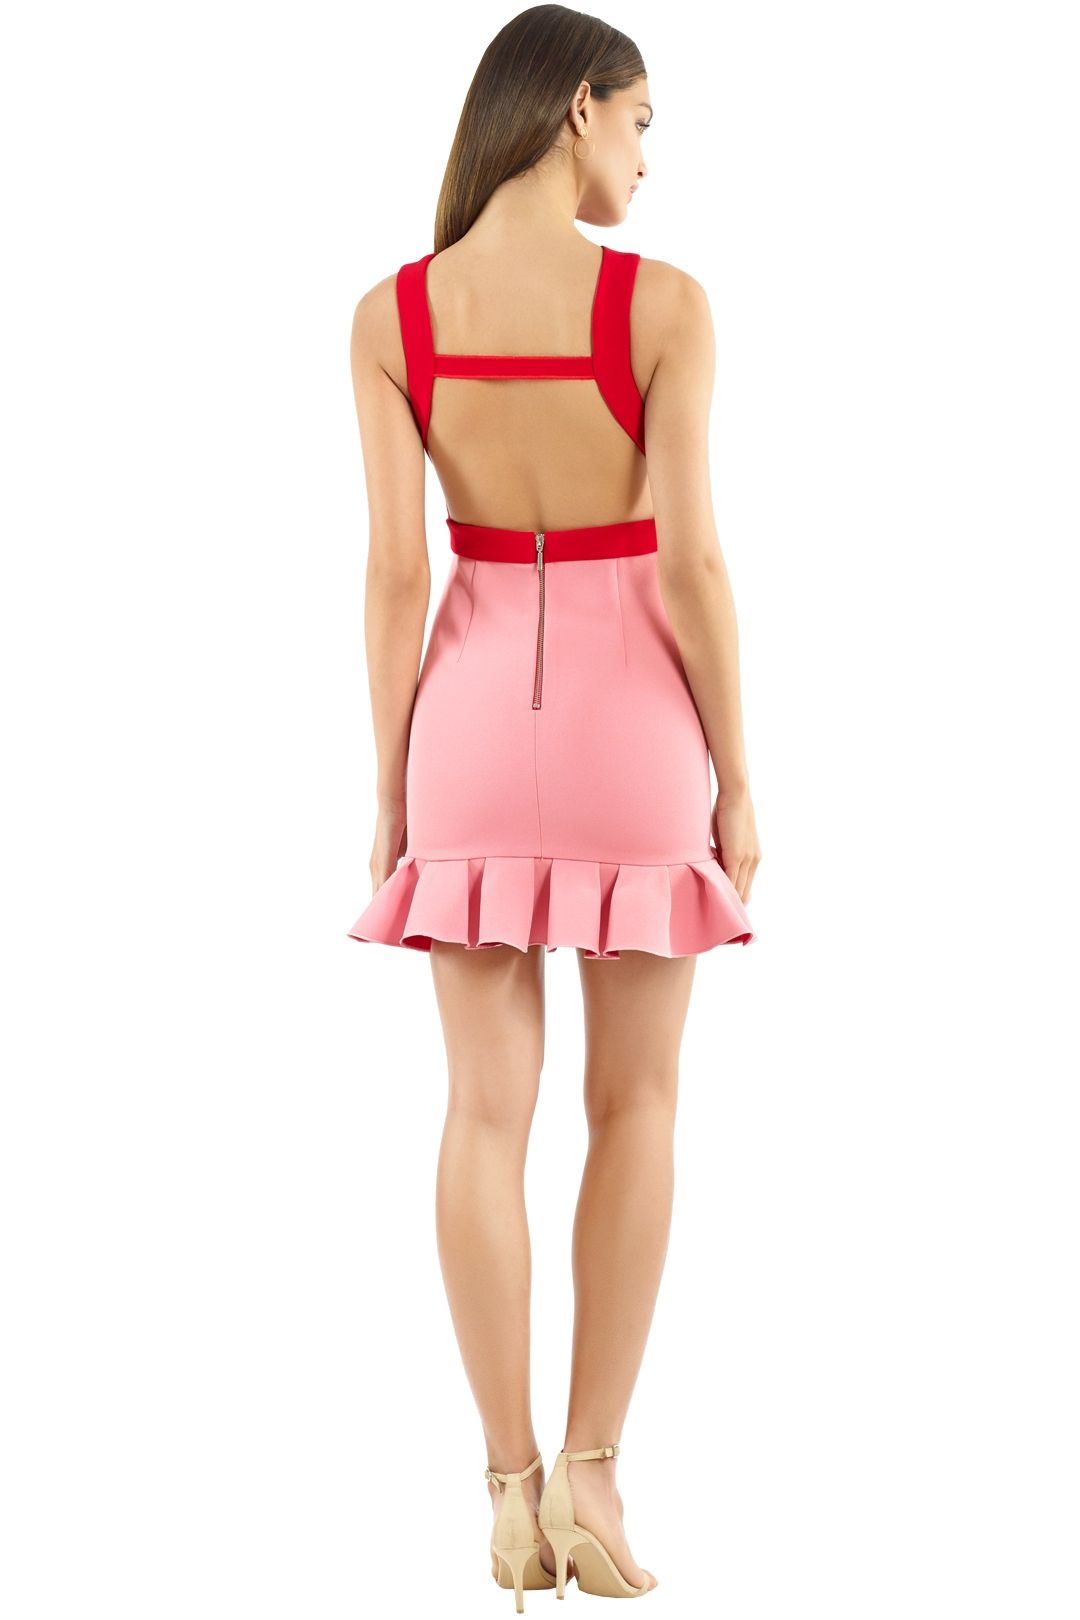 Yeojin Bae - Tilly Dress - Red Pink - Back